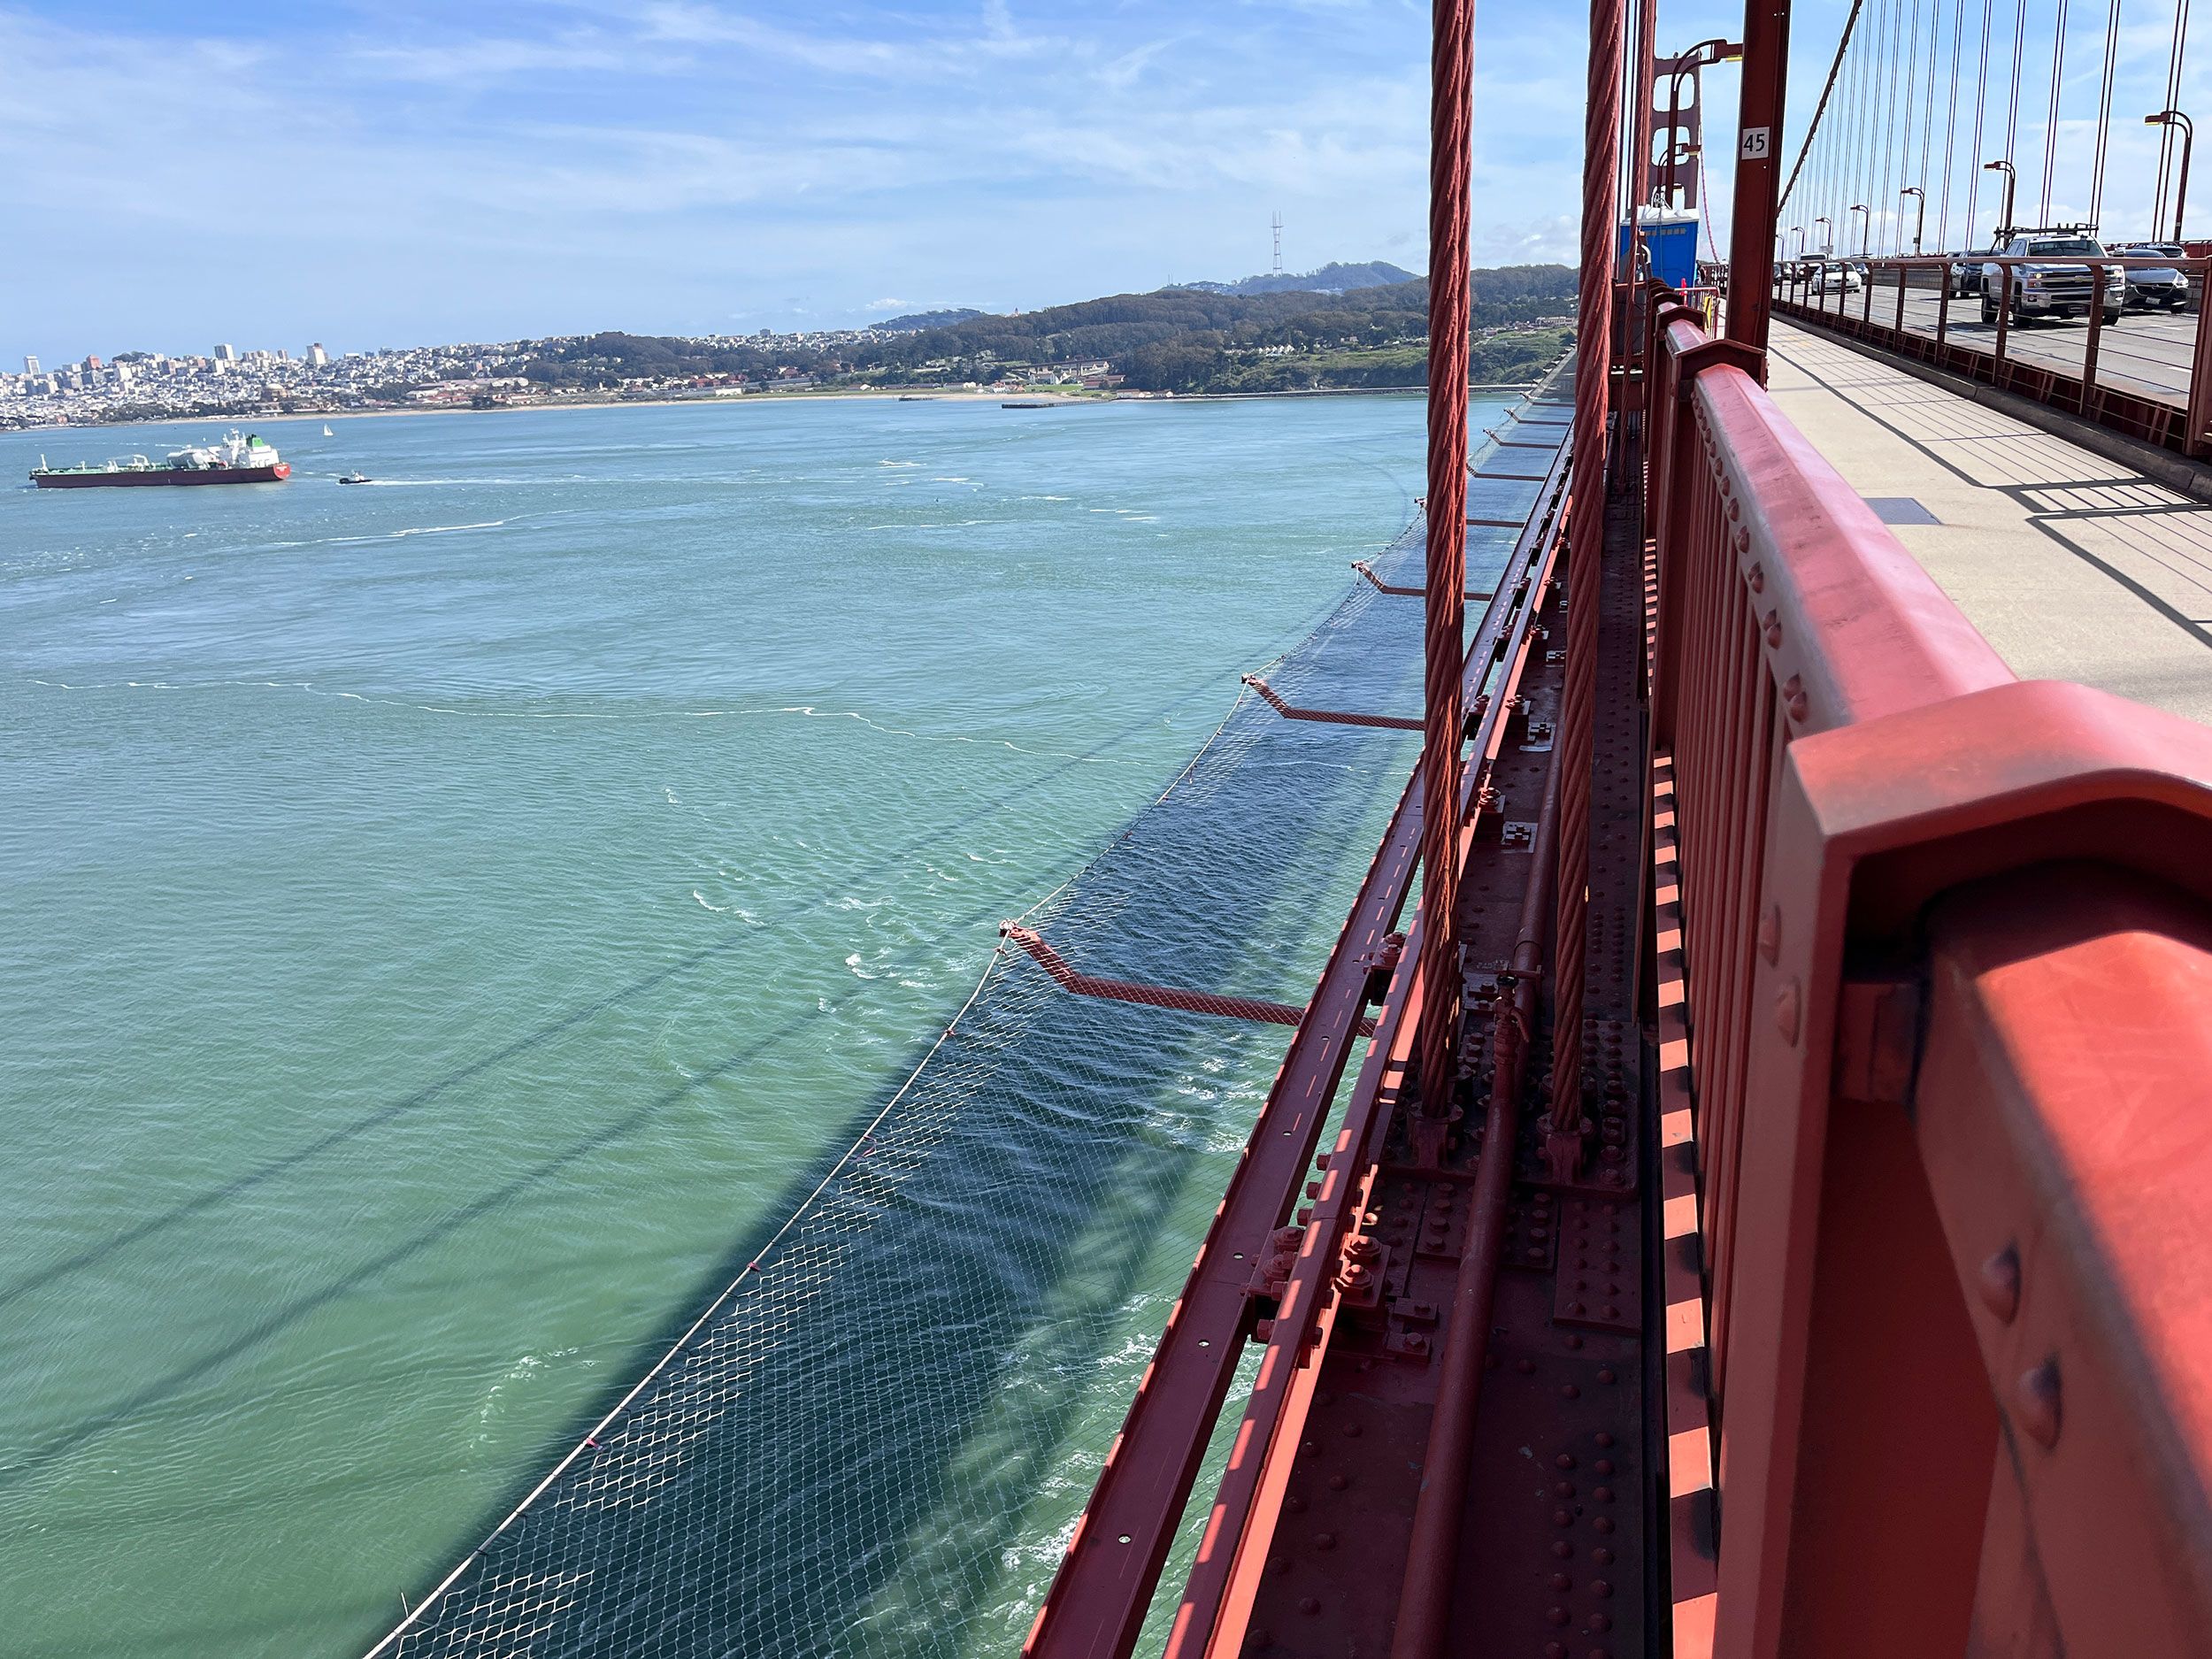 All I wanted to do was live': After years of debate, a suicide safety net  for the Golden Gate Bridge is nearing completion. Survivors say it'll give  many a 2nd chance at